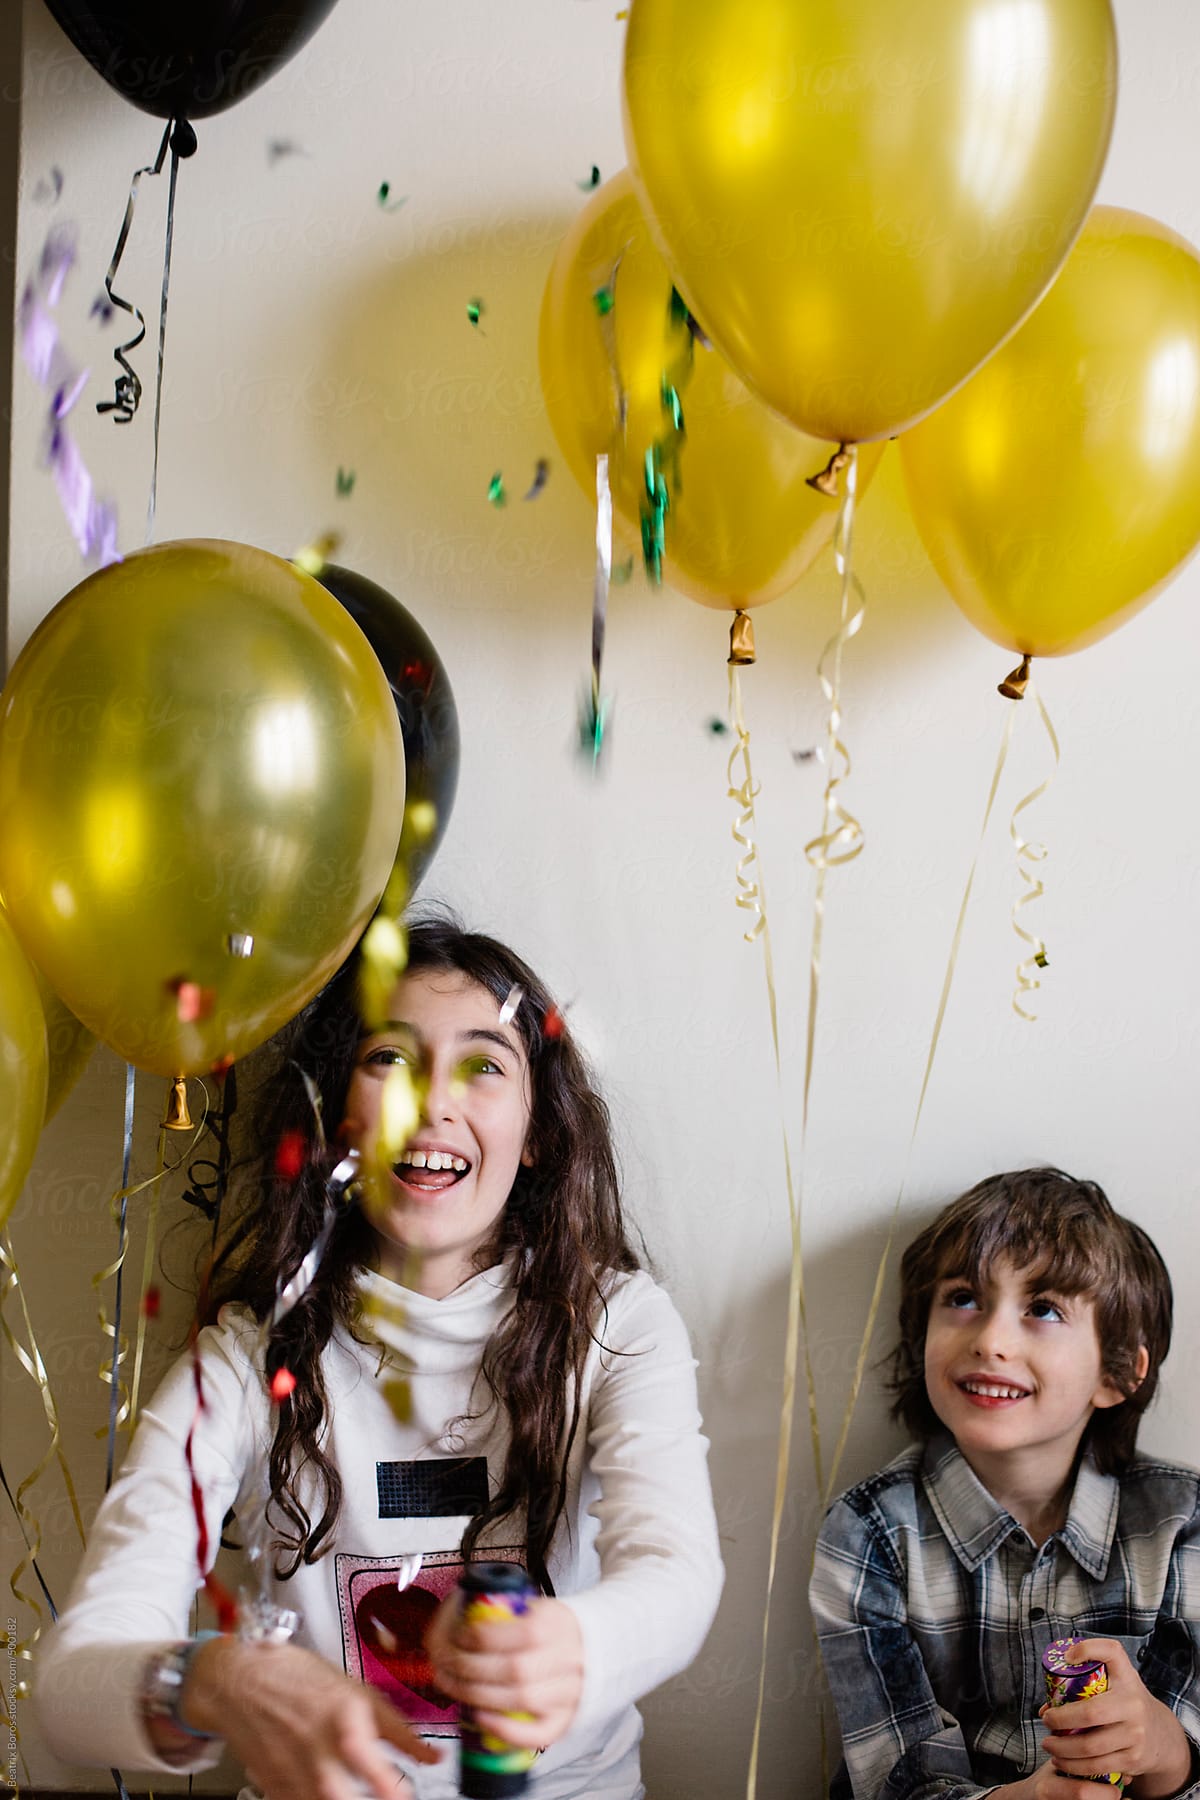 Boy and girl are happy and laughing at a party with balloons and confetti